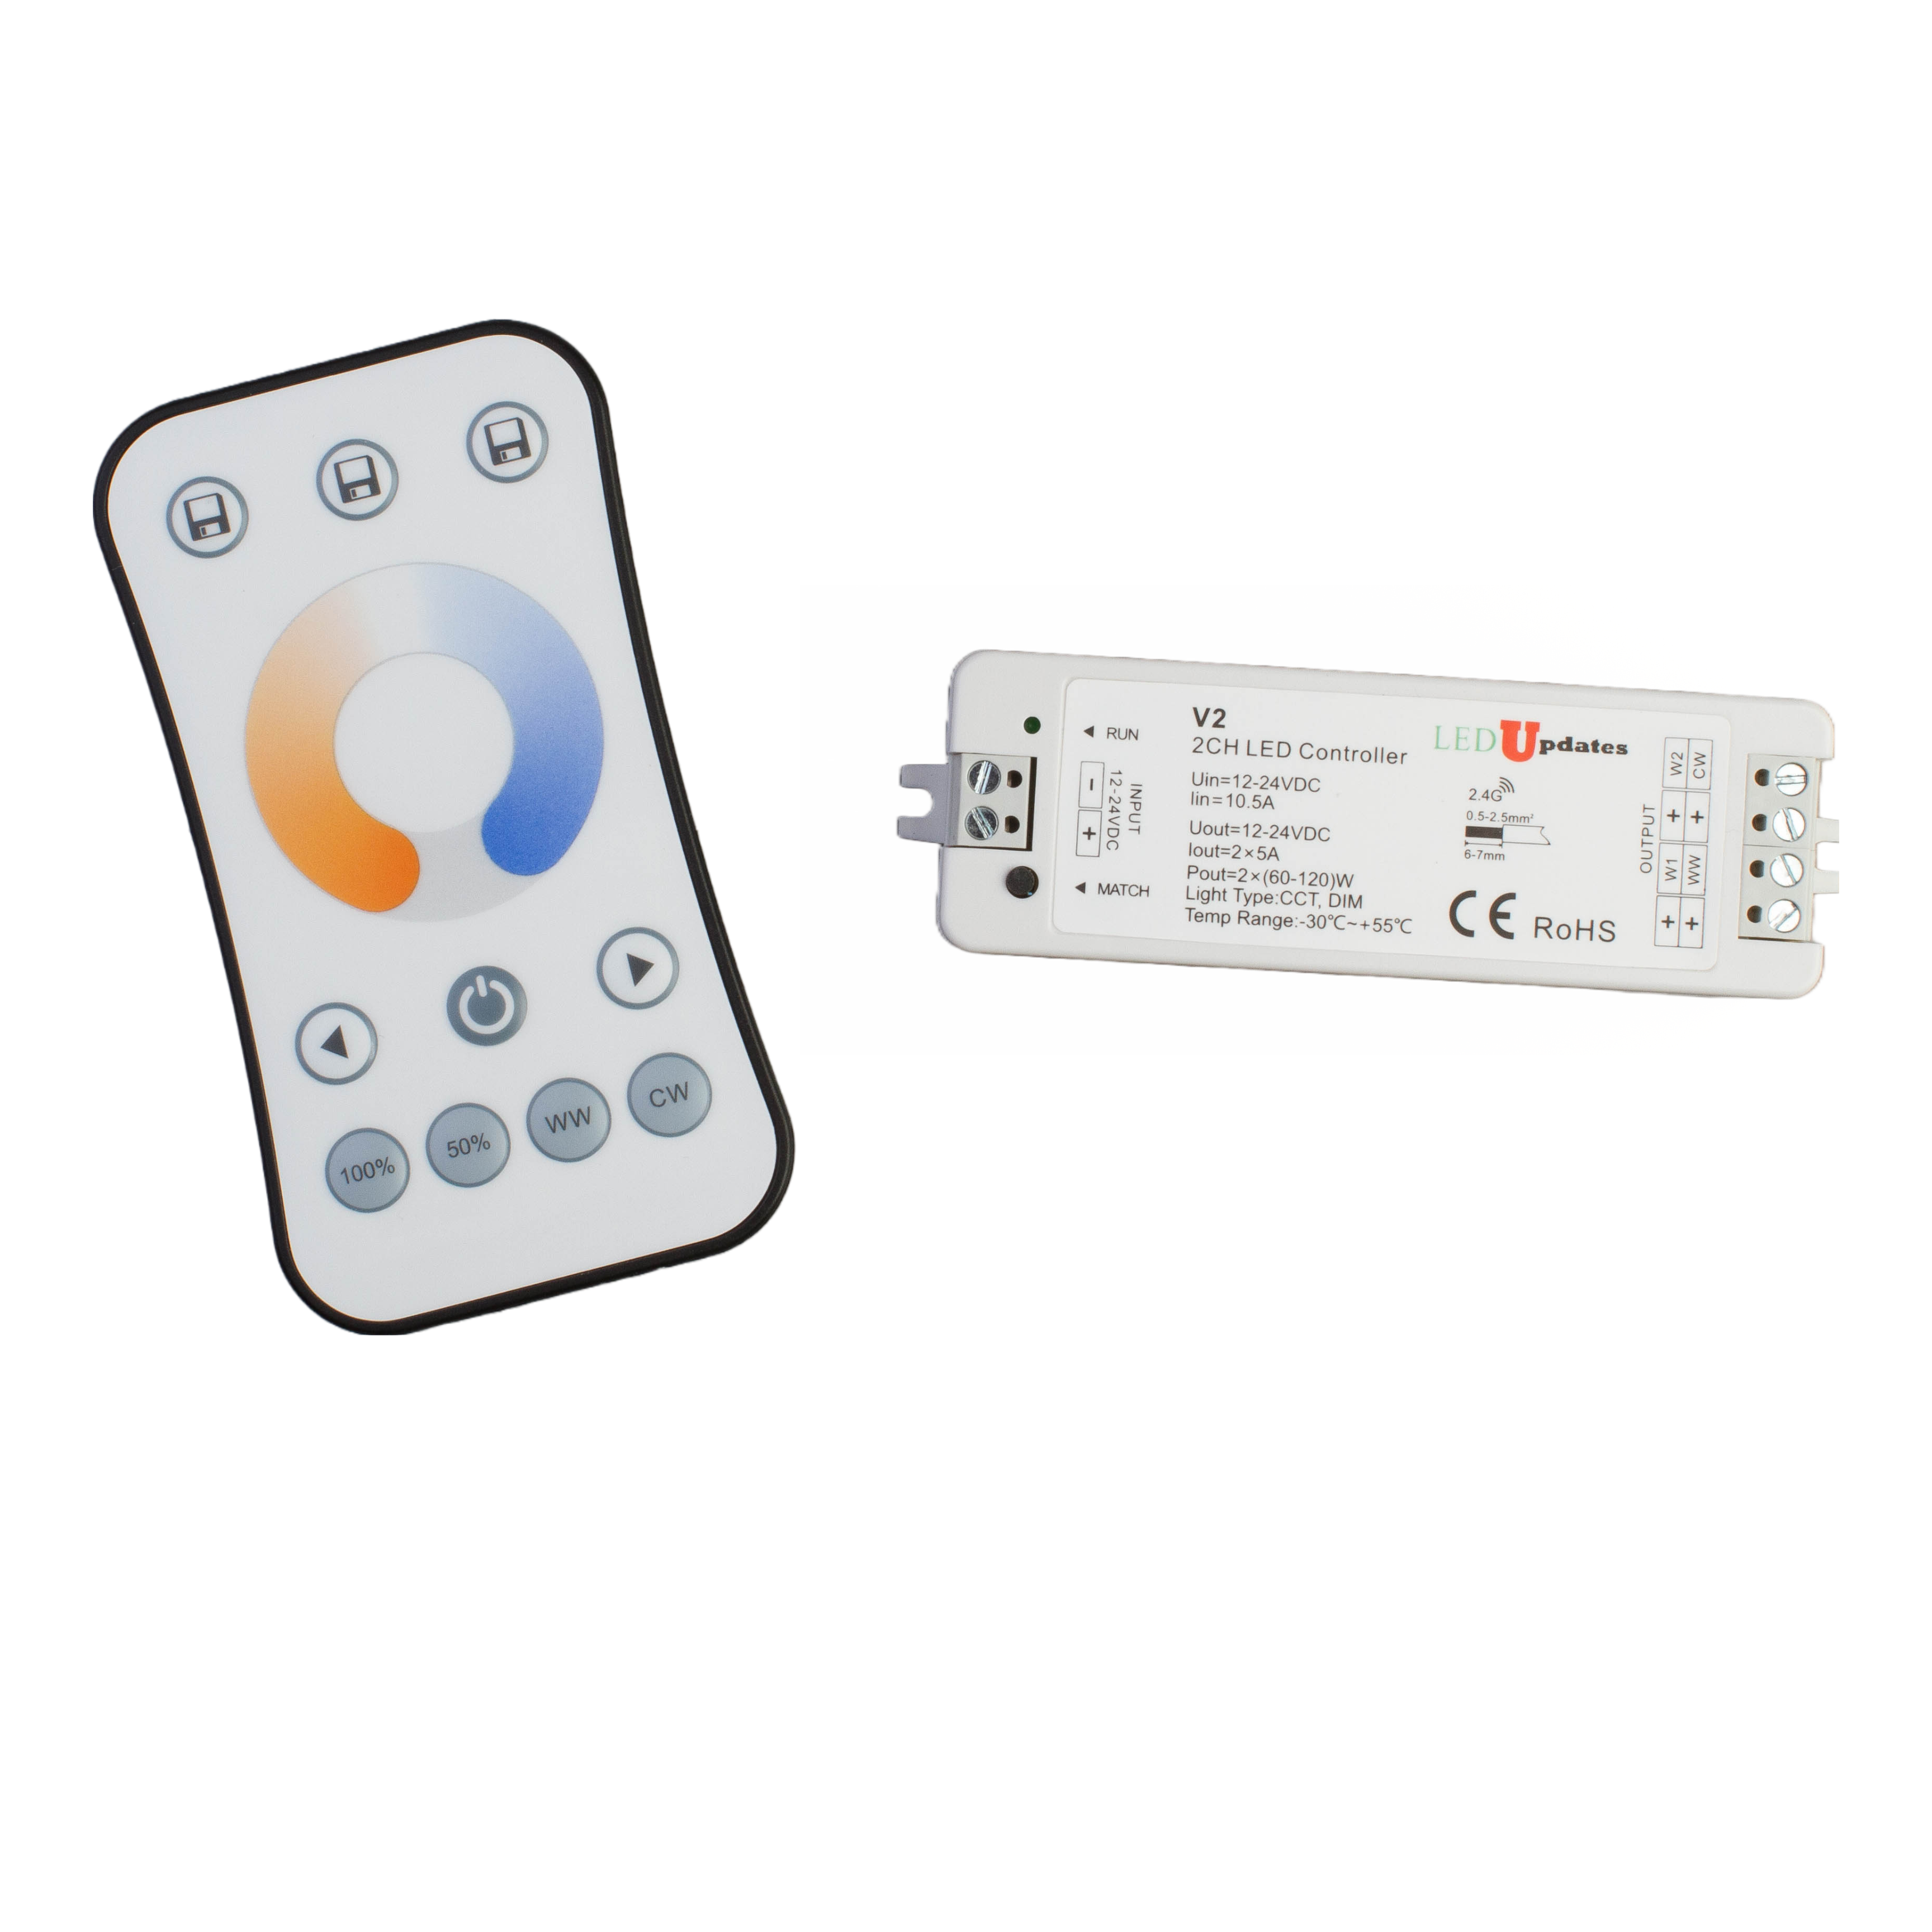 CCT LED Strip Controller with Wireless Remote for Warm White (2700K) to Cool White (6500K) 2 in 1 Dual Color LED Strip Light